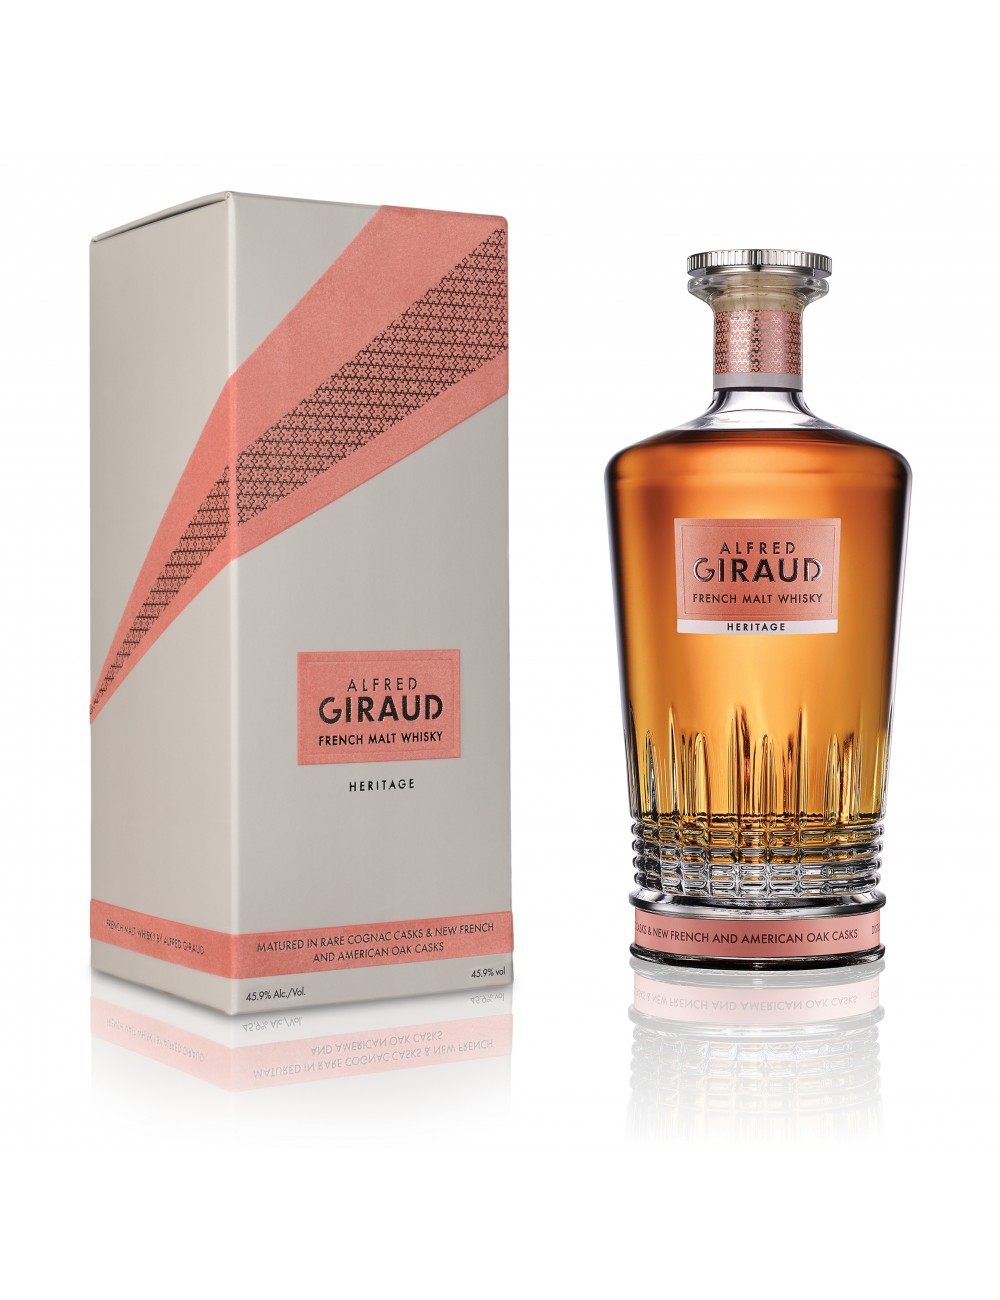 WHISKY HERITAGE ALFRED GIRAUD - 70cl